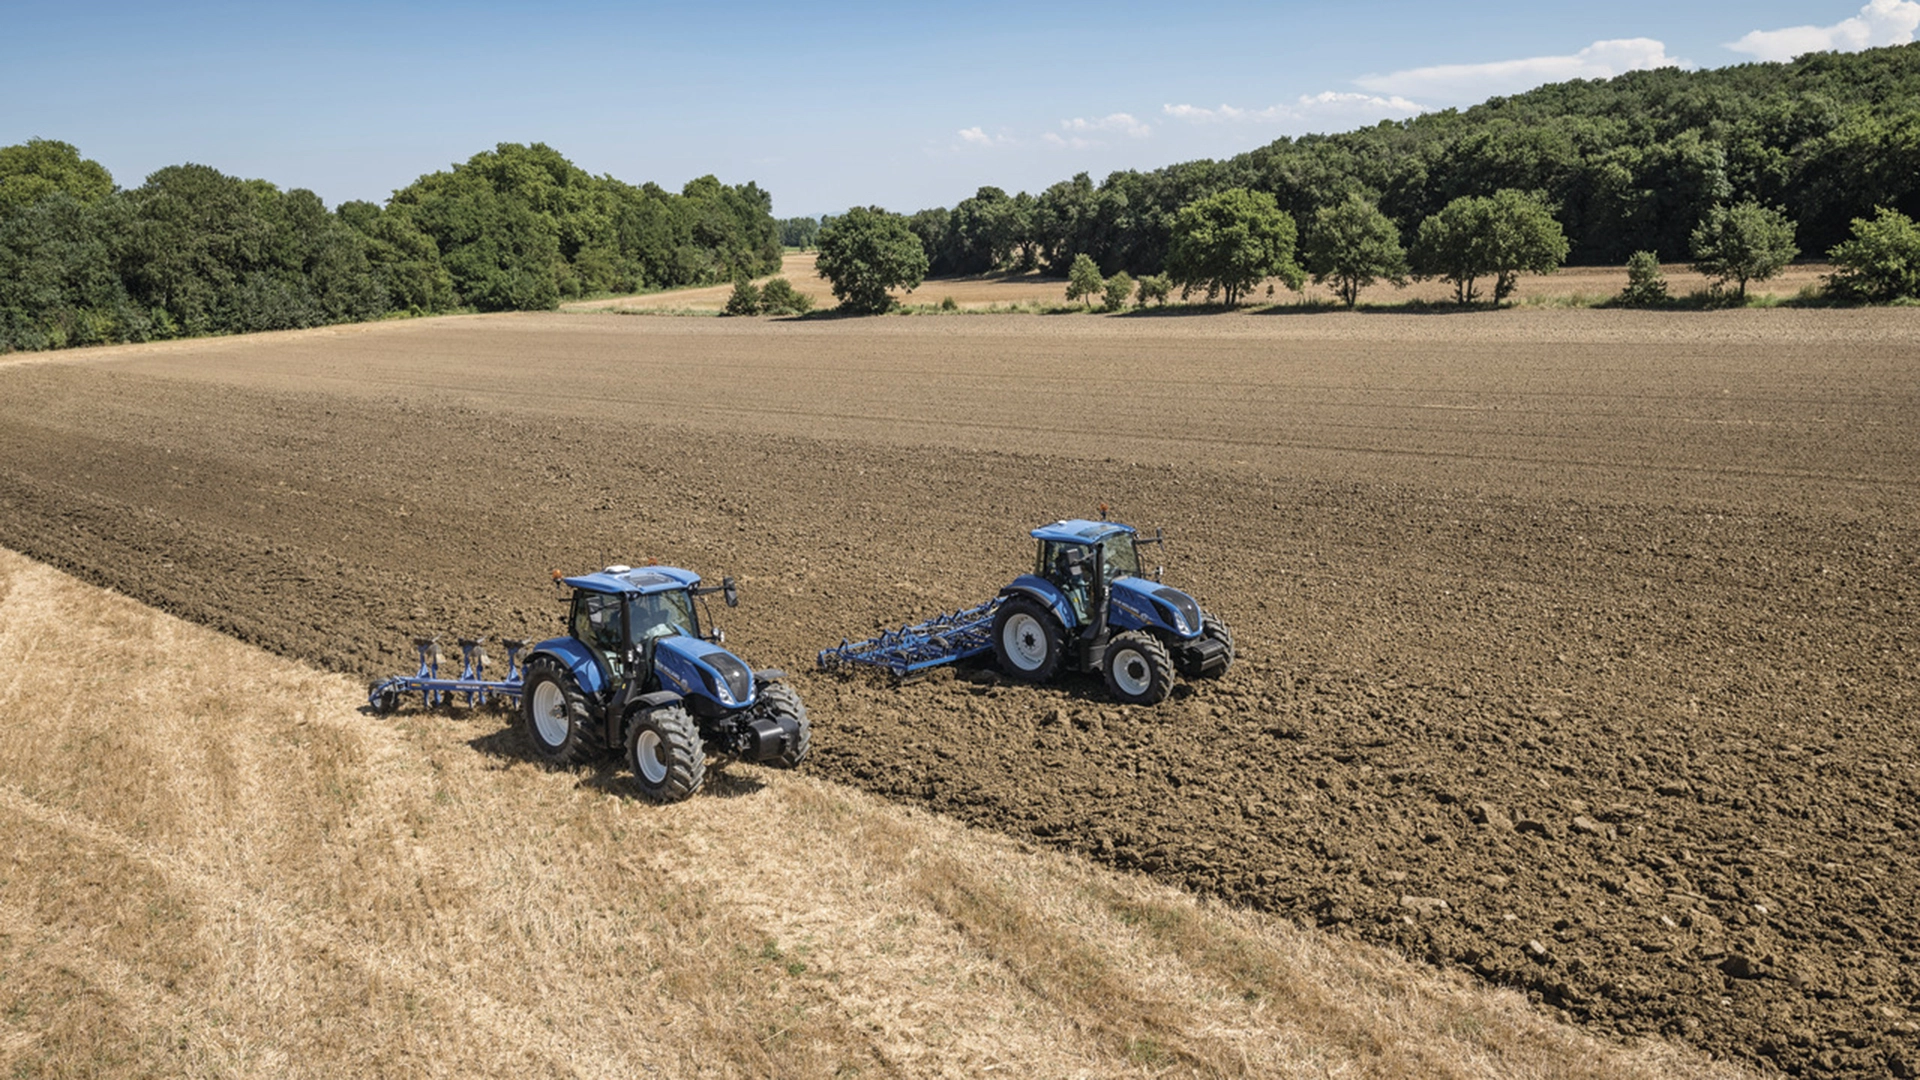 New Holland's Tractor with 6 furrow plough on field